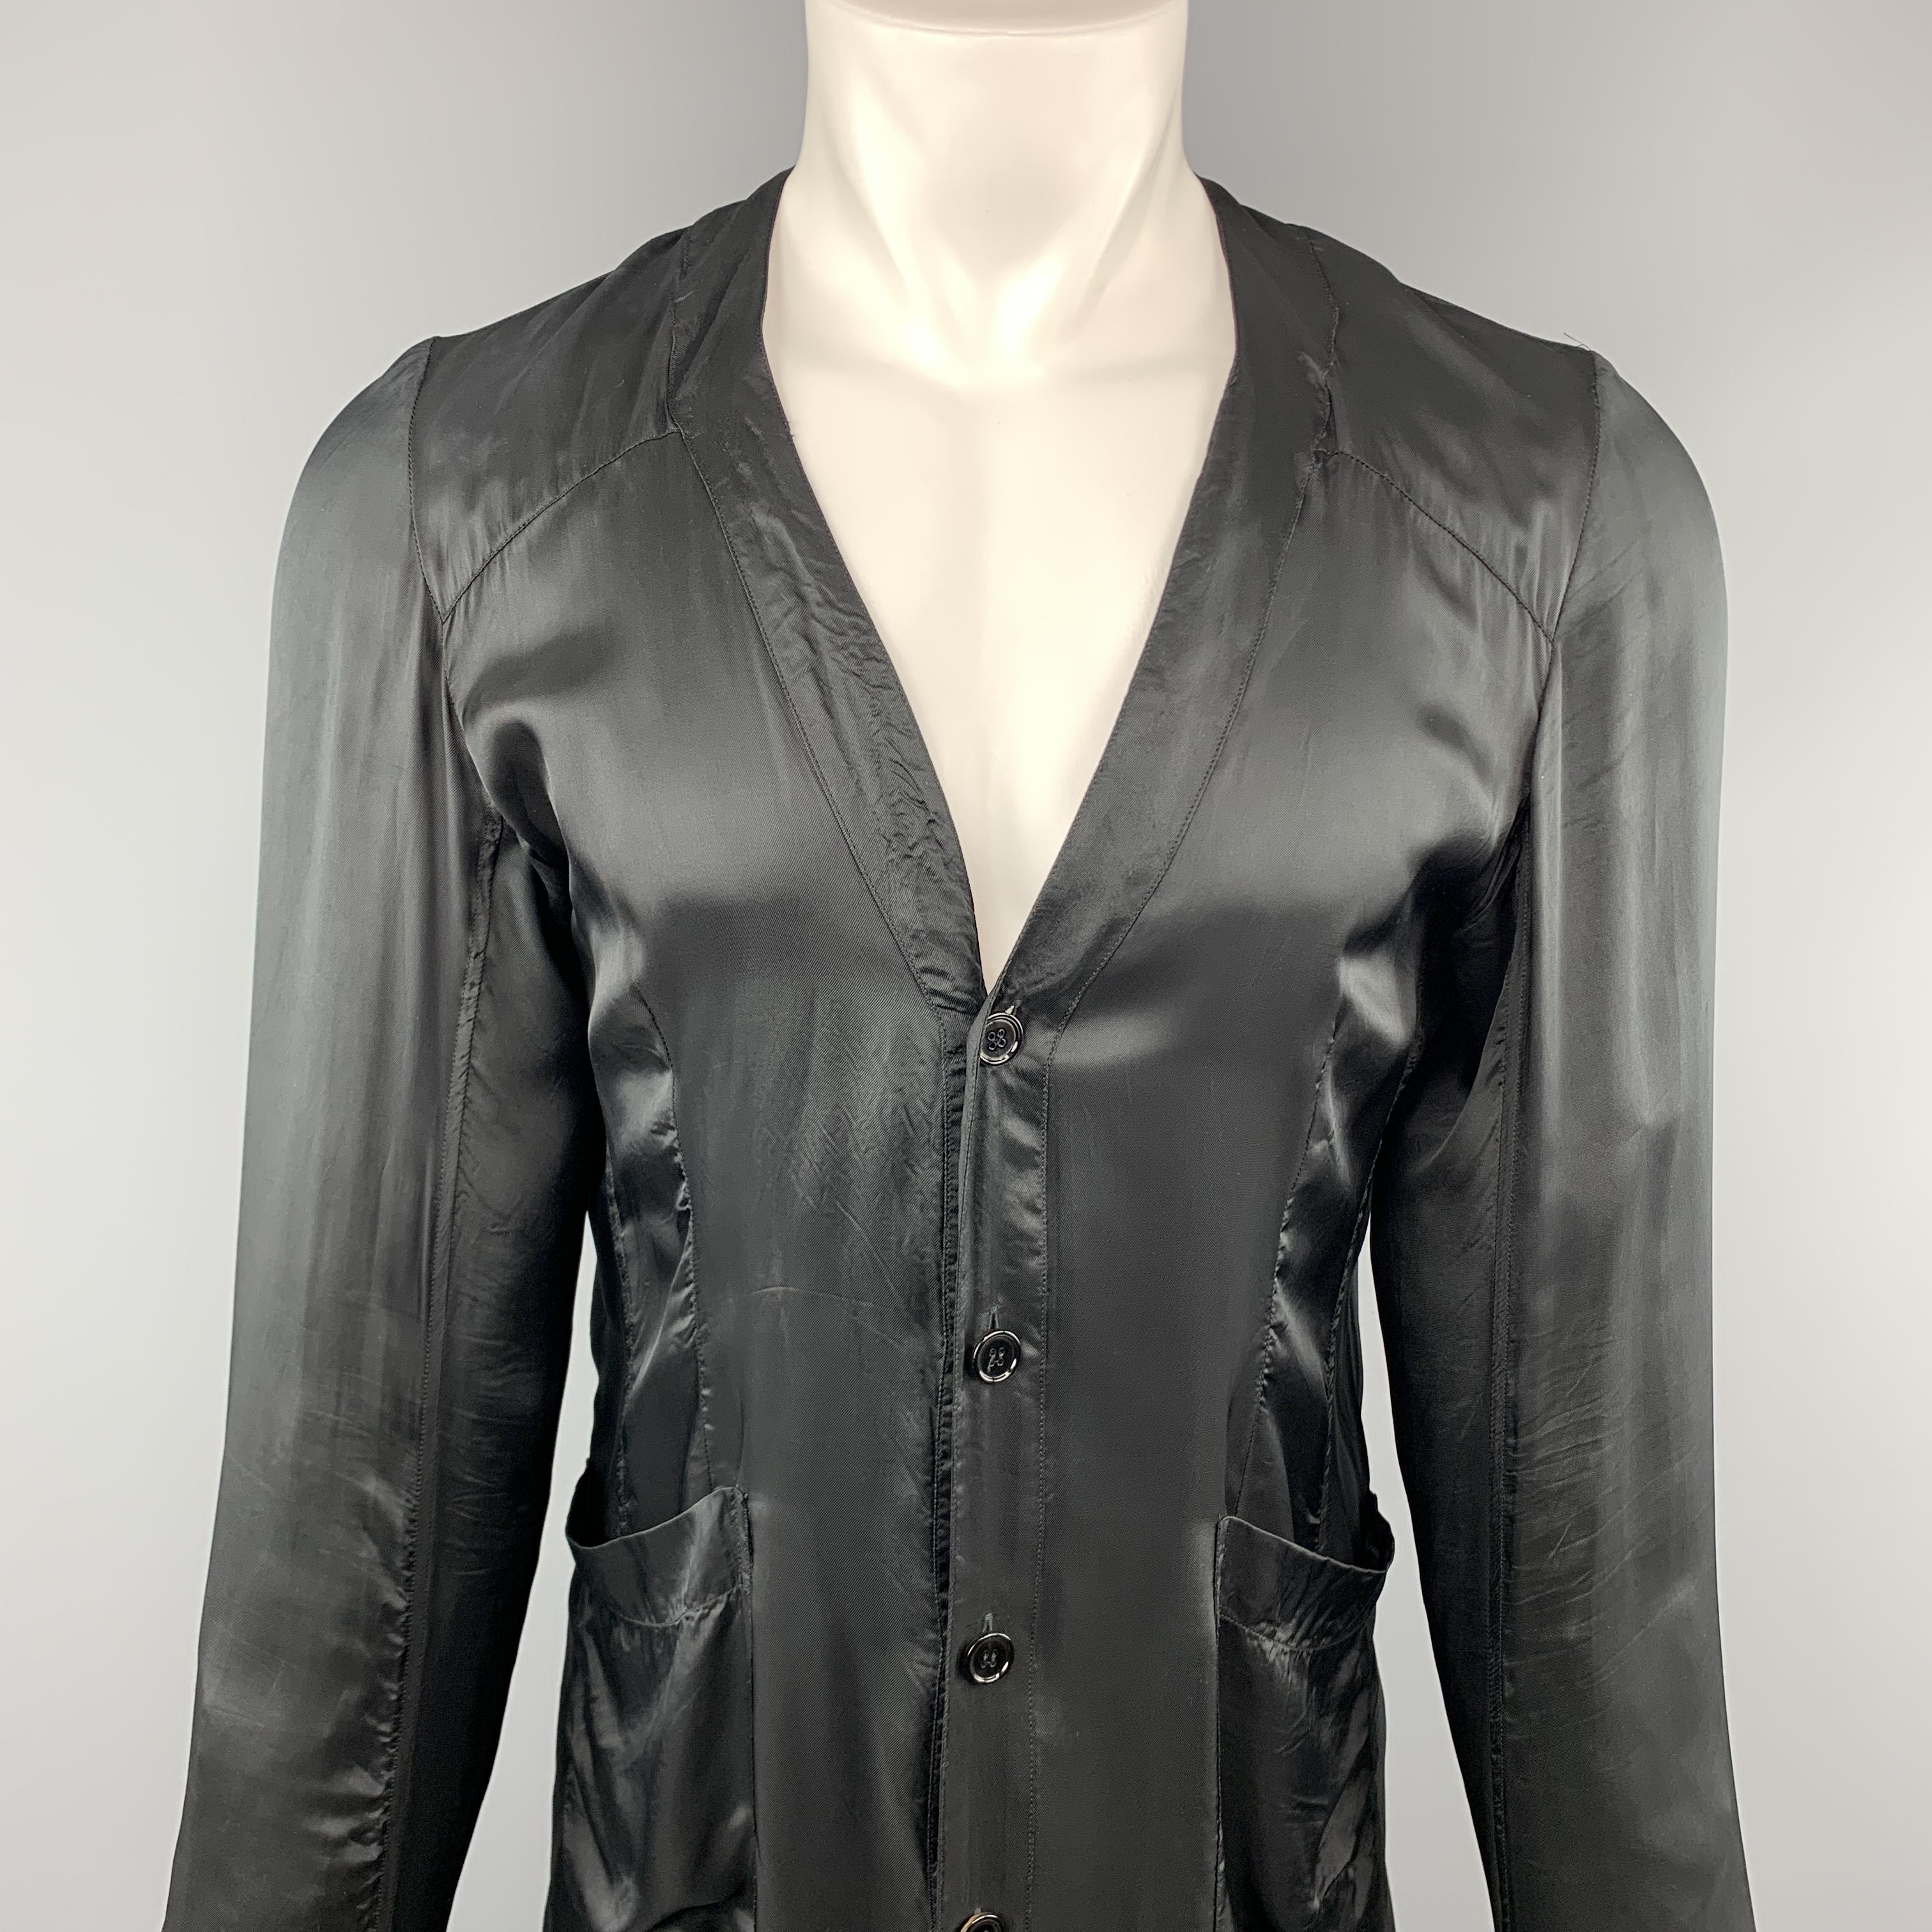 ALEXANDER MCQUEEN cardigan jacket comes in a light weight robe like satin with a deep V neckline, button up front, and patch pockets. Made in Romania.
 
Excellent Pre-Owned Condition.
Marked: IT 48
 
Measurements:
 
Shoulder: 17 in.
Chest: 42